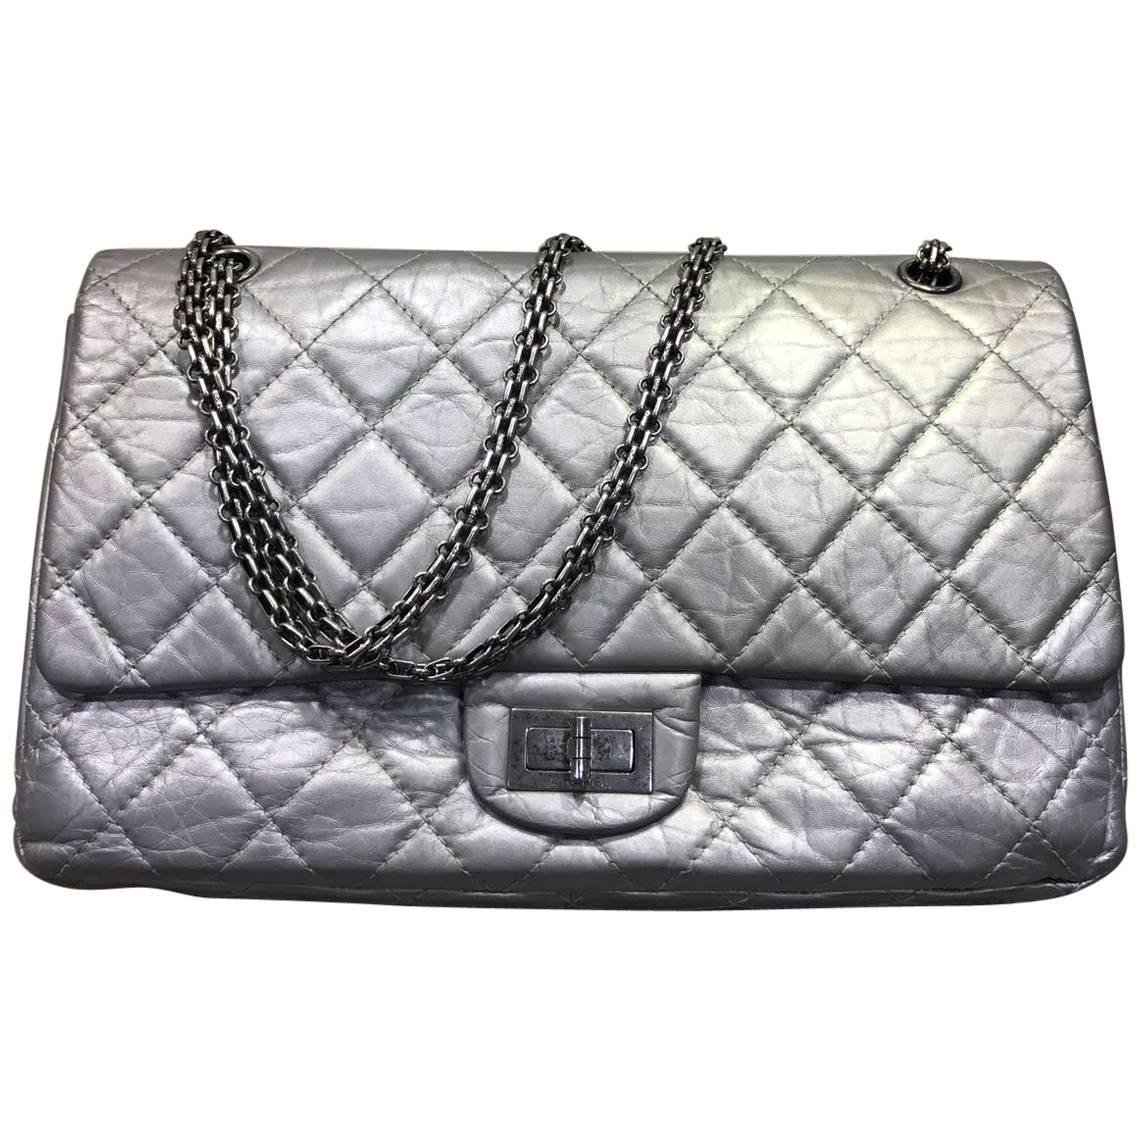 Chanel Silver Aged Calfskin Leather Quilted 2.55 Double Flap Bag